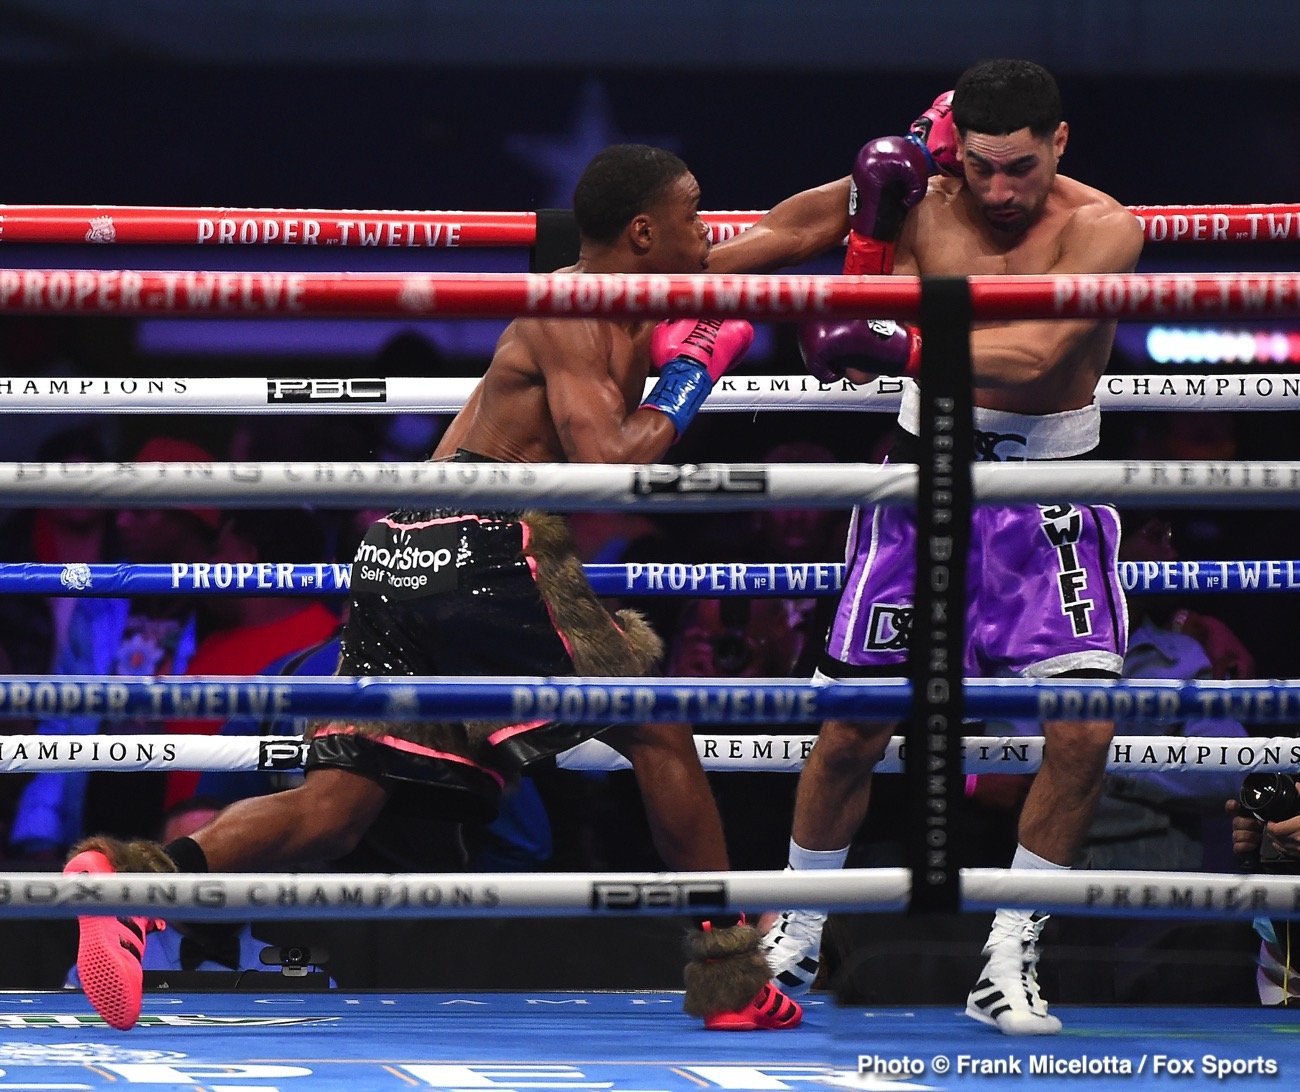 Image: Danny Garcia fighting in February or March at 154